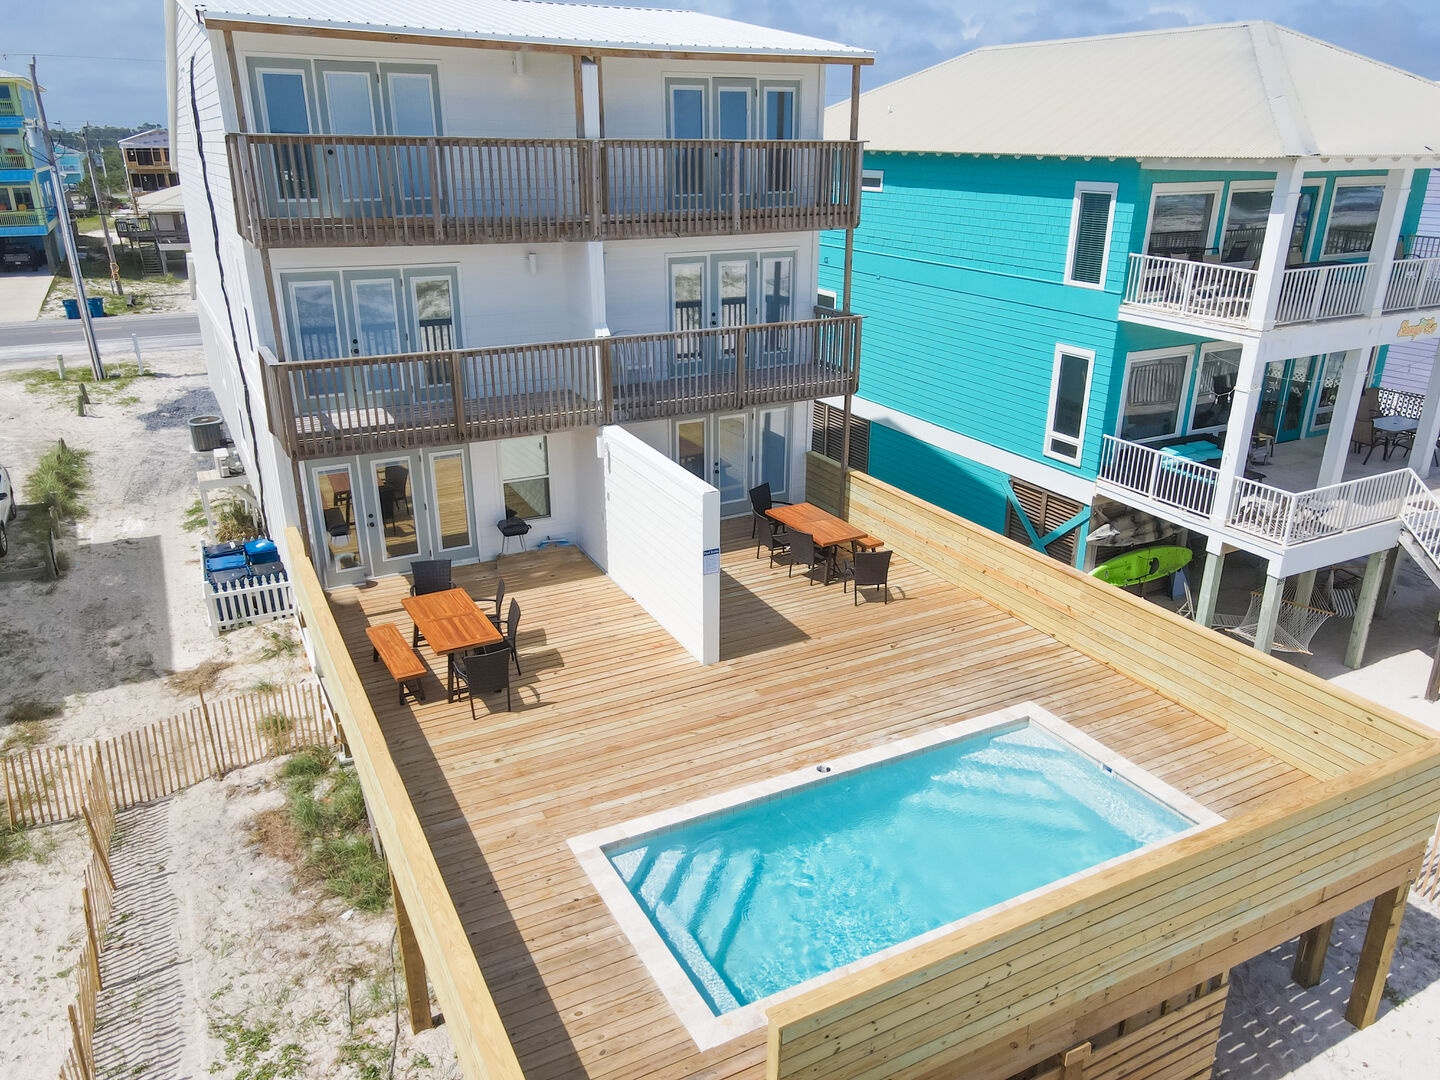 A License to Chill B is the west side of this beachfront duplex